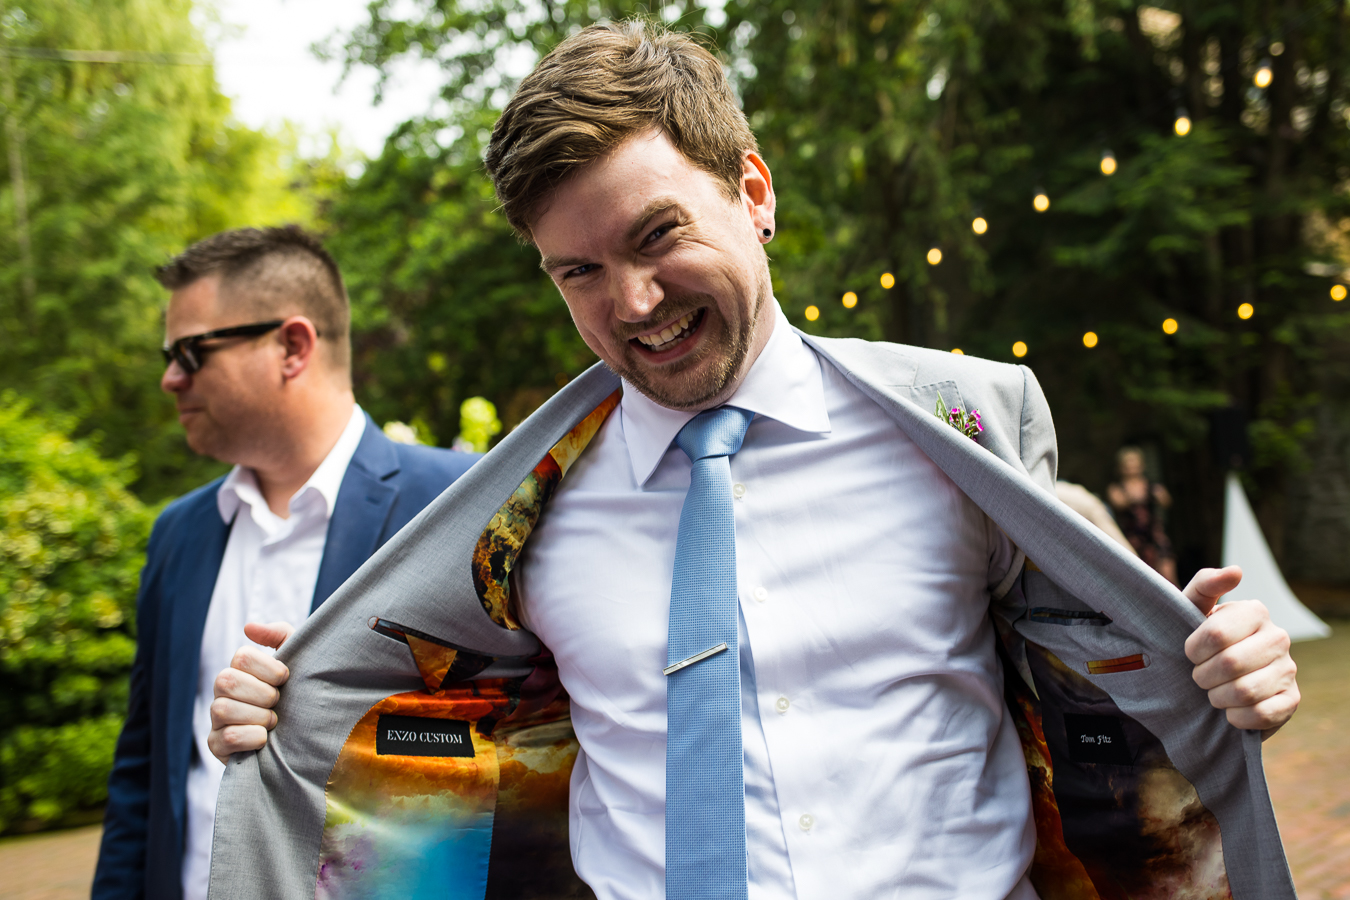 fun, colorful, vibrant image of the brother of the groom showing off his unique, colorful, custom suit for the wedding 